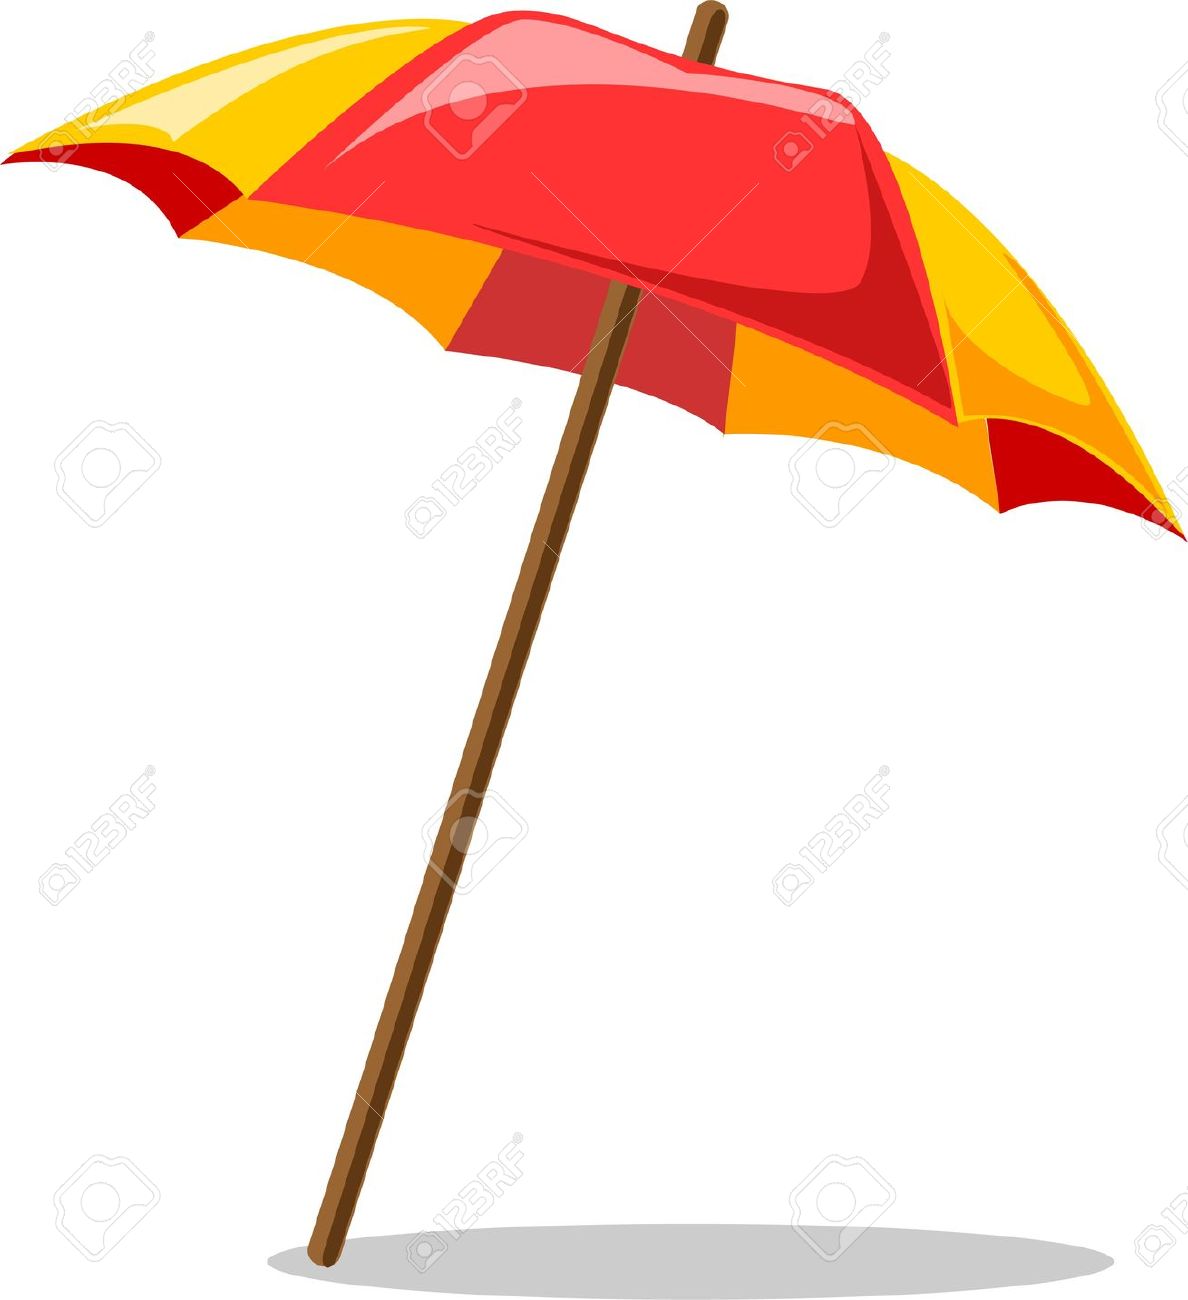 Parasols clipart - Clipground